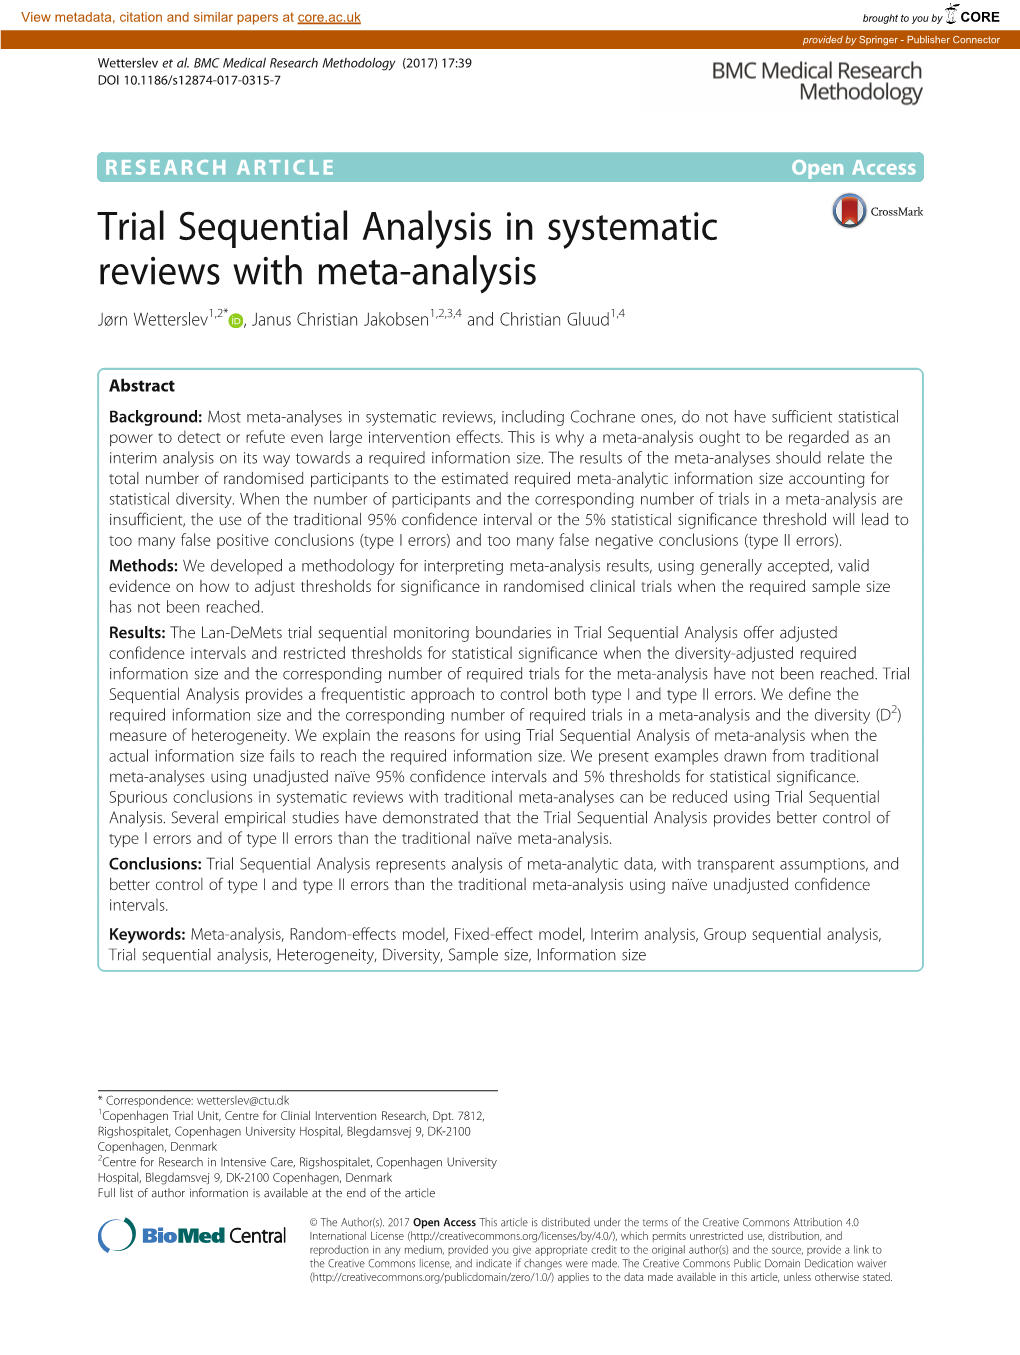 Trial Sequential Analysis in Systematic Reviews with Meta-Analysis Jørn Wetterslev1,2* , Janus Christian Jakobsen1,2,3,4 and Christian Gluud1,4